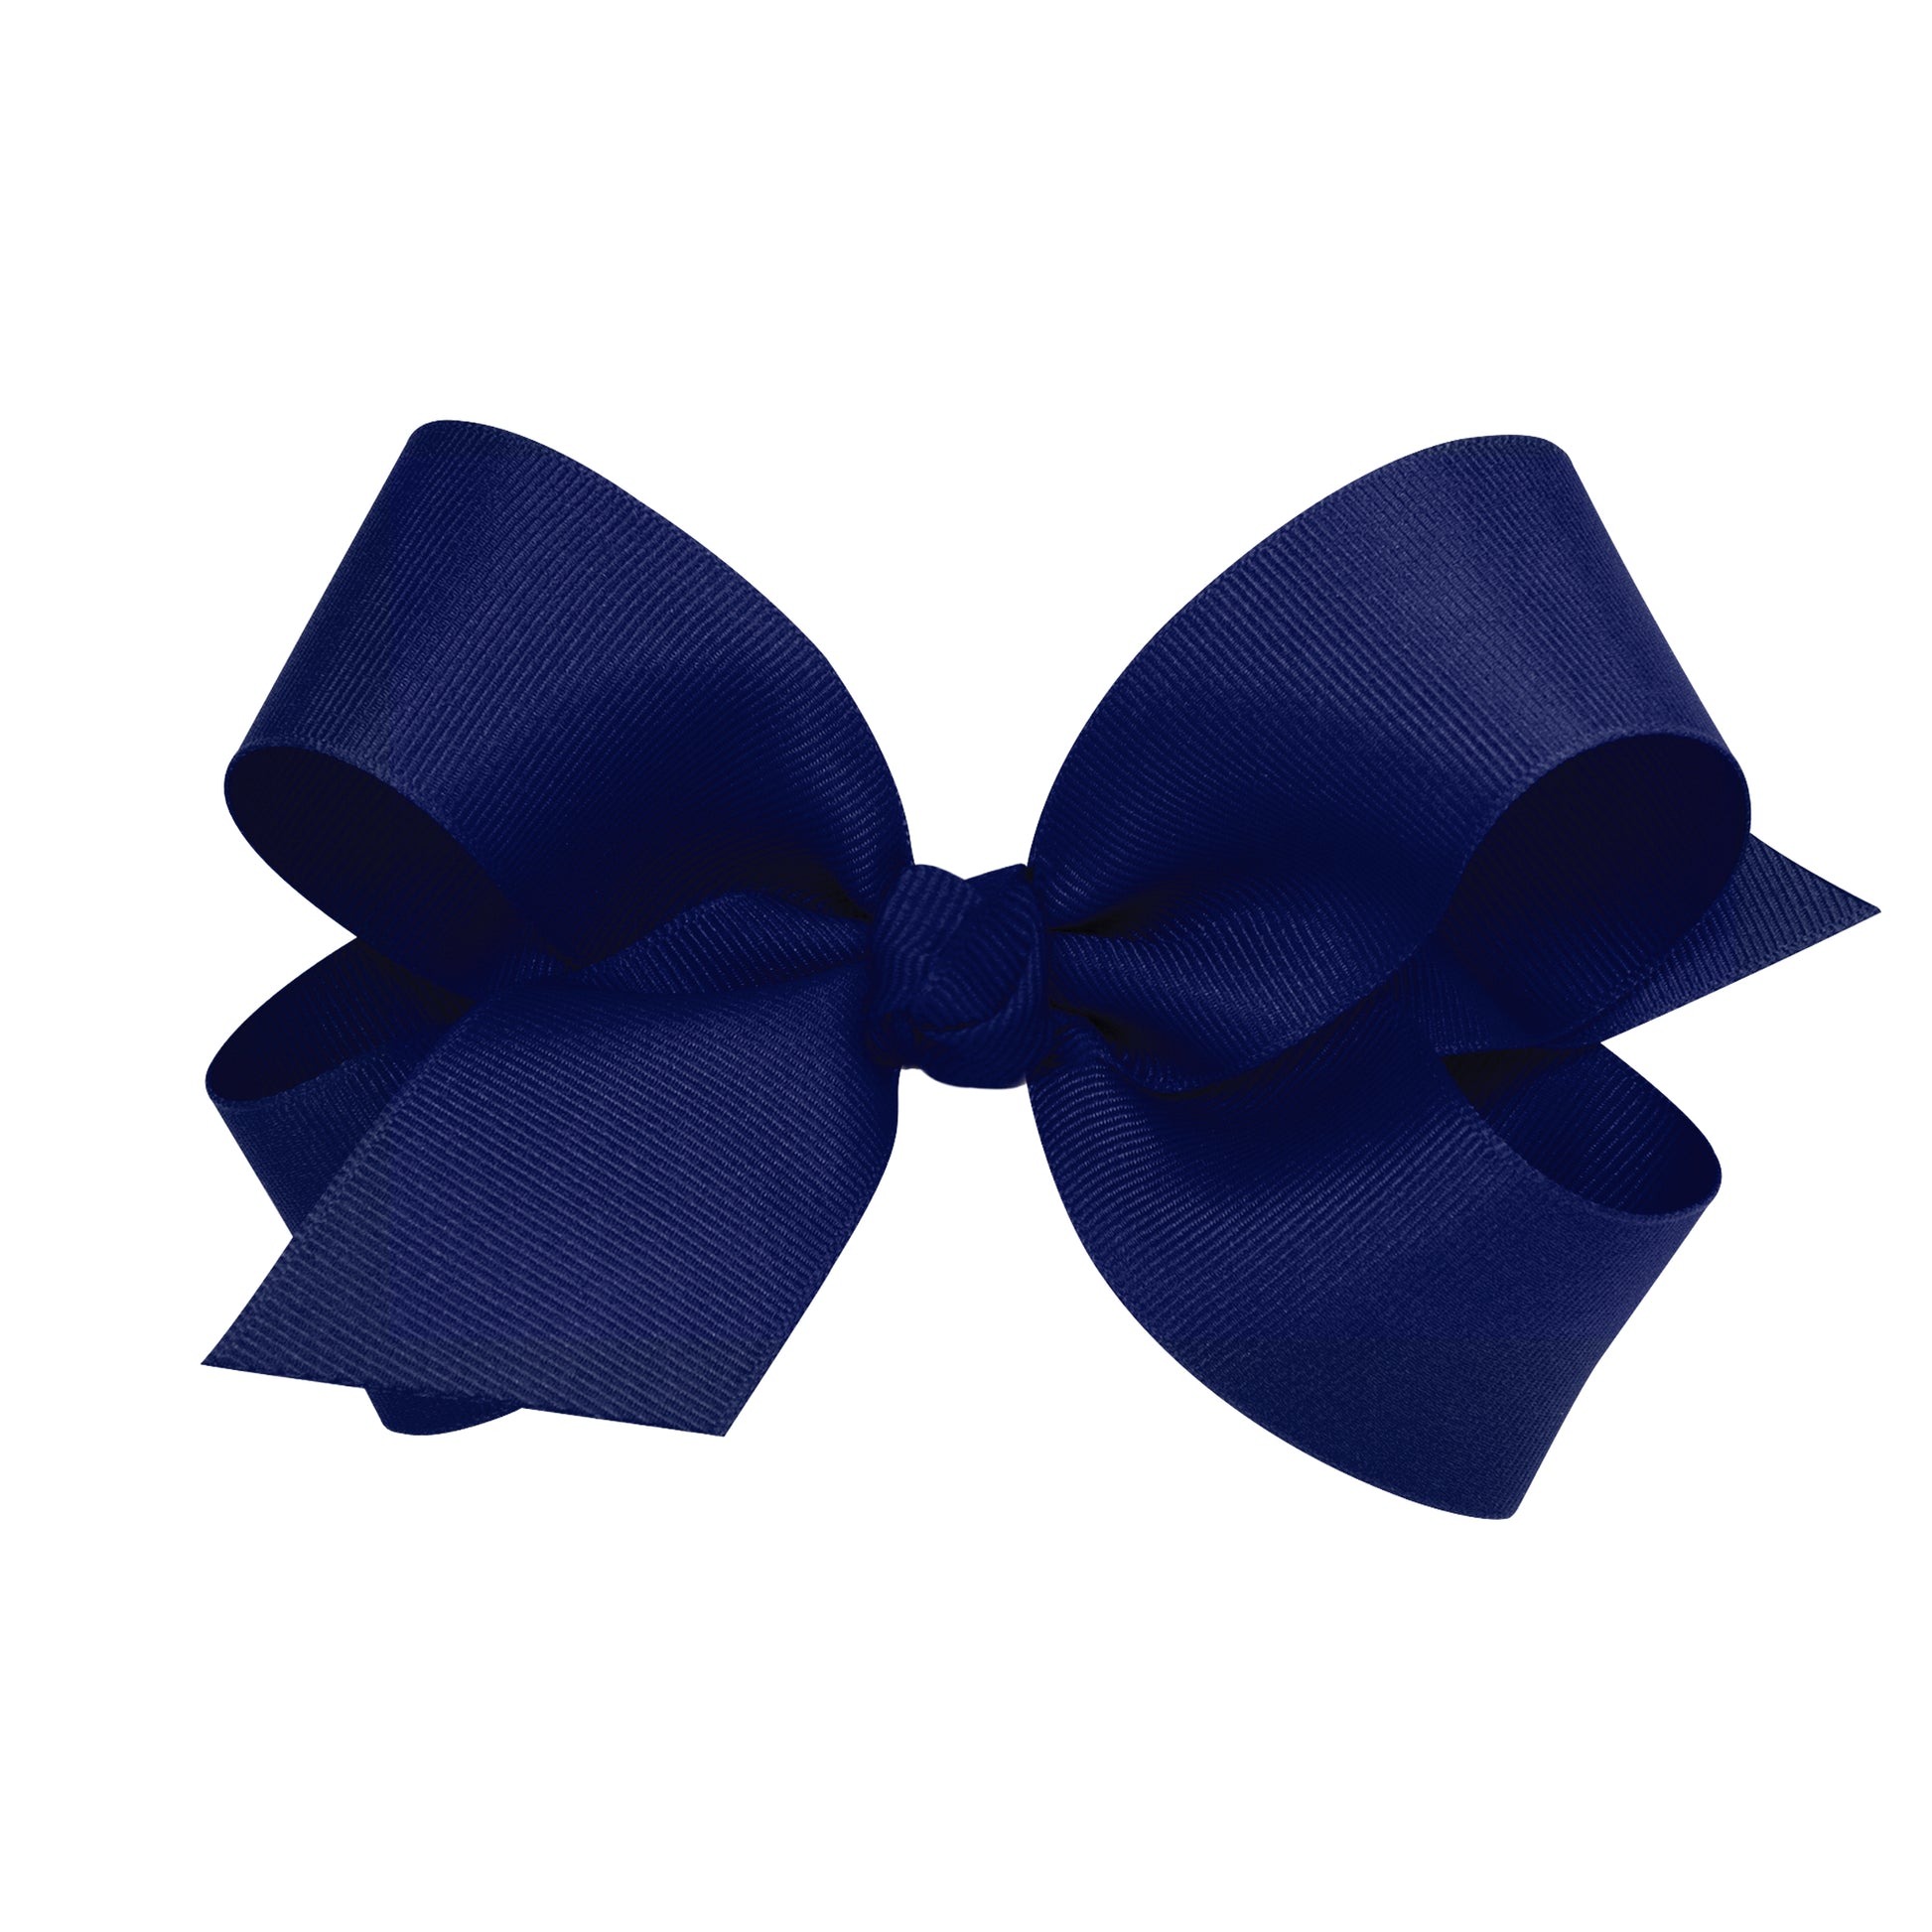 Wee Ones Large Grosgrain Hair Bow with Center Knot - Light Navy